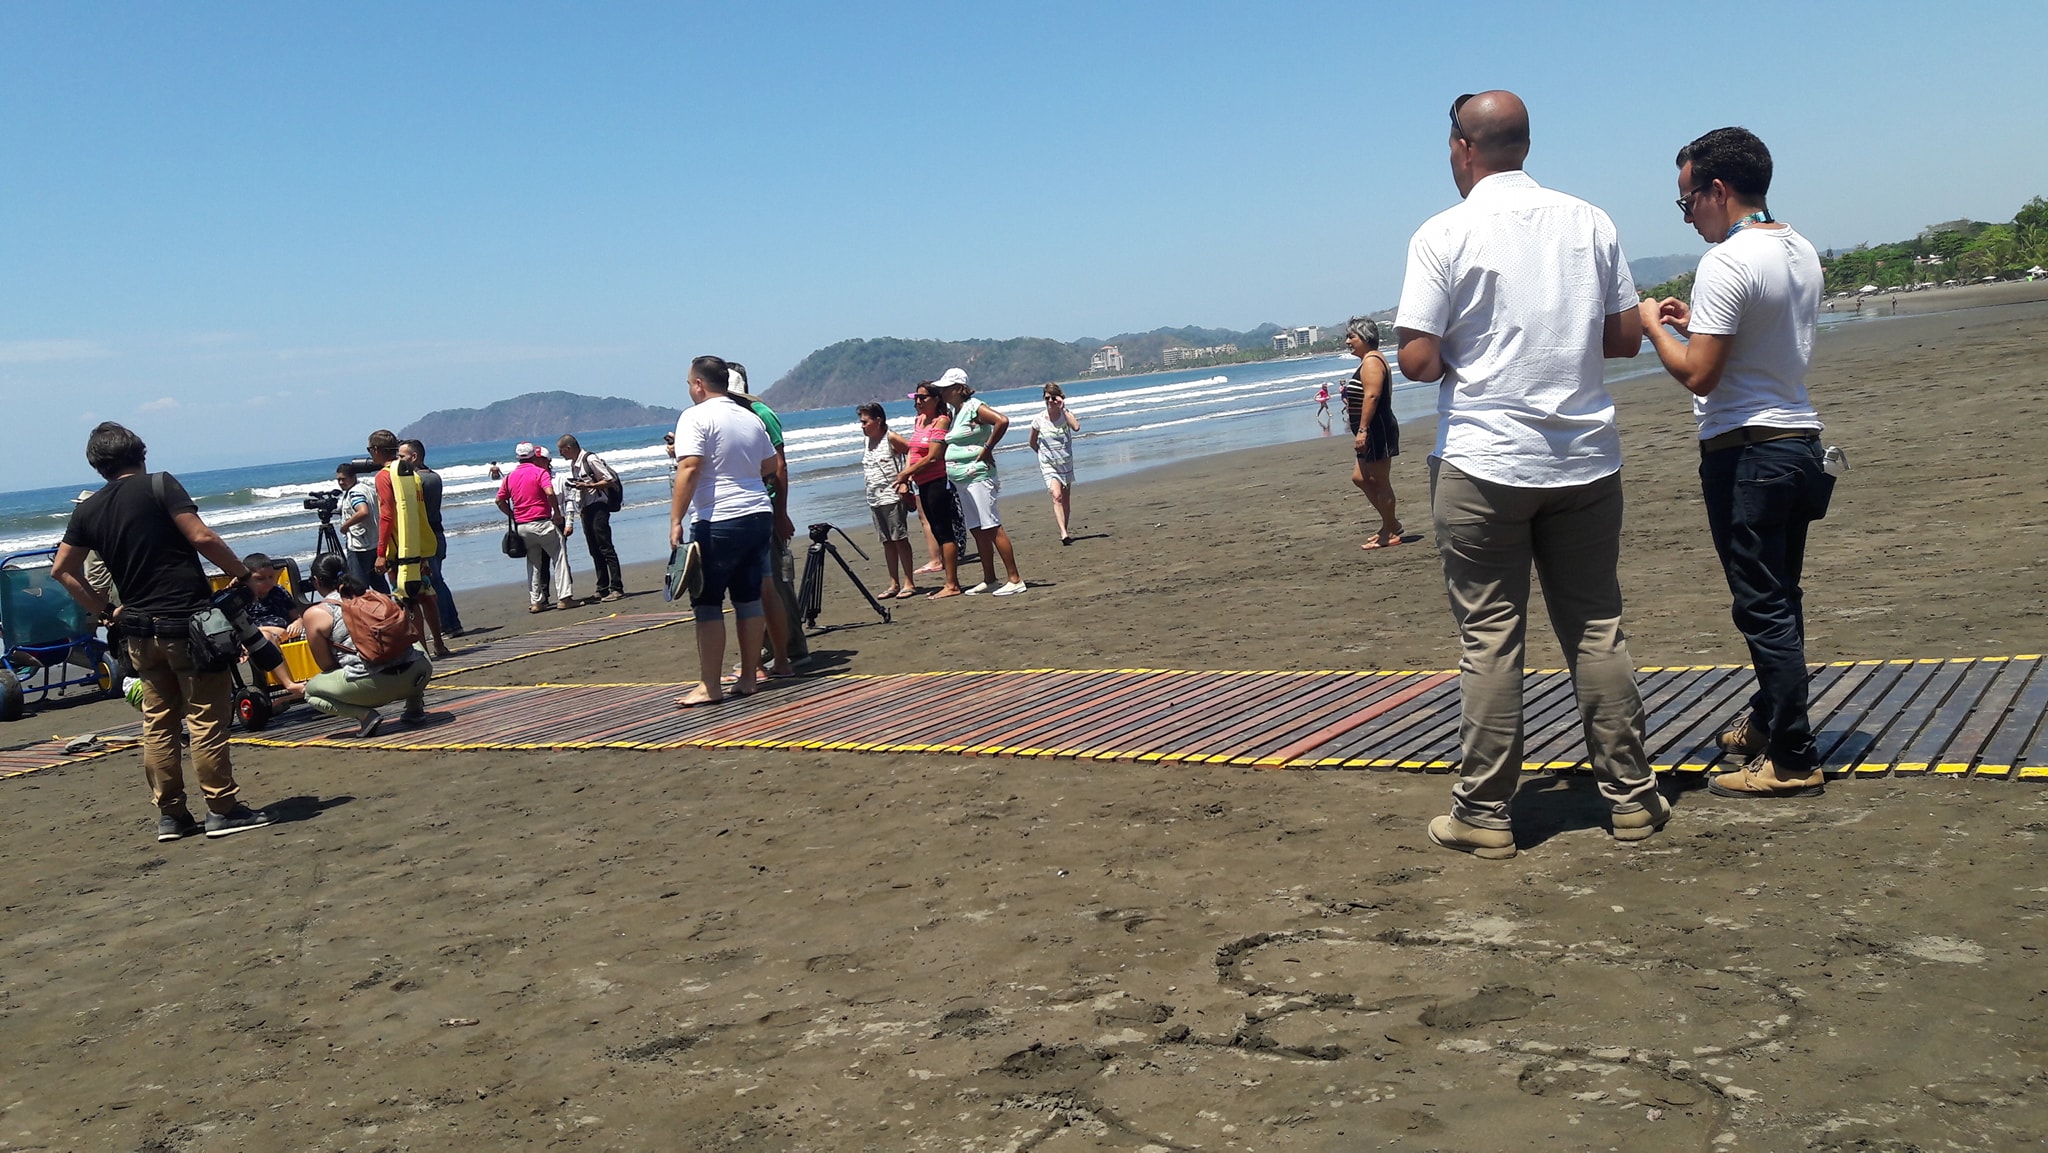 Jaco Beach Costa Rica is the First Beach in Central America to be Fully Accessible to People with Disabilities - Rica Star News